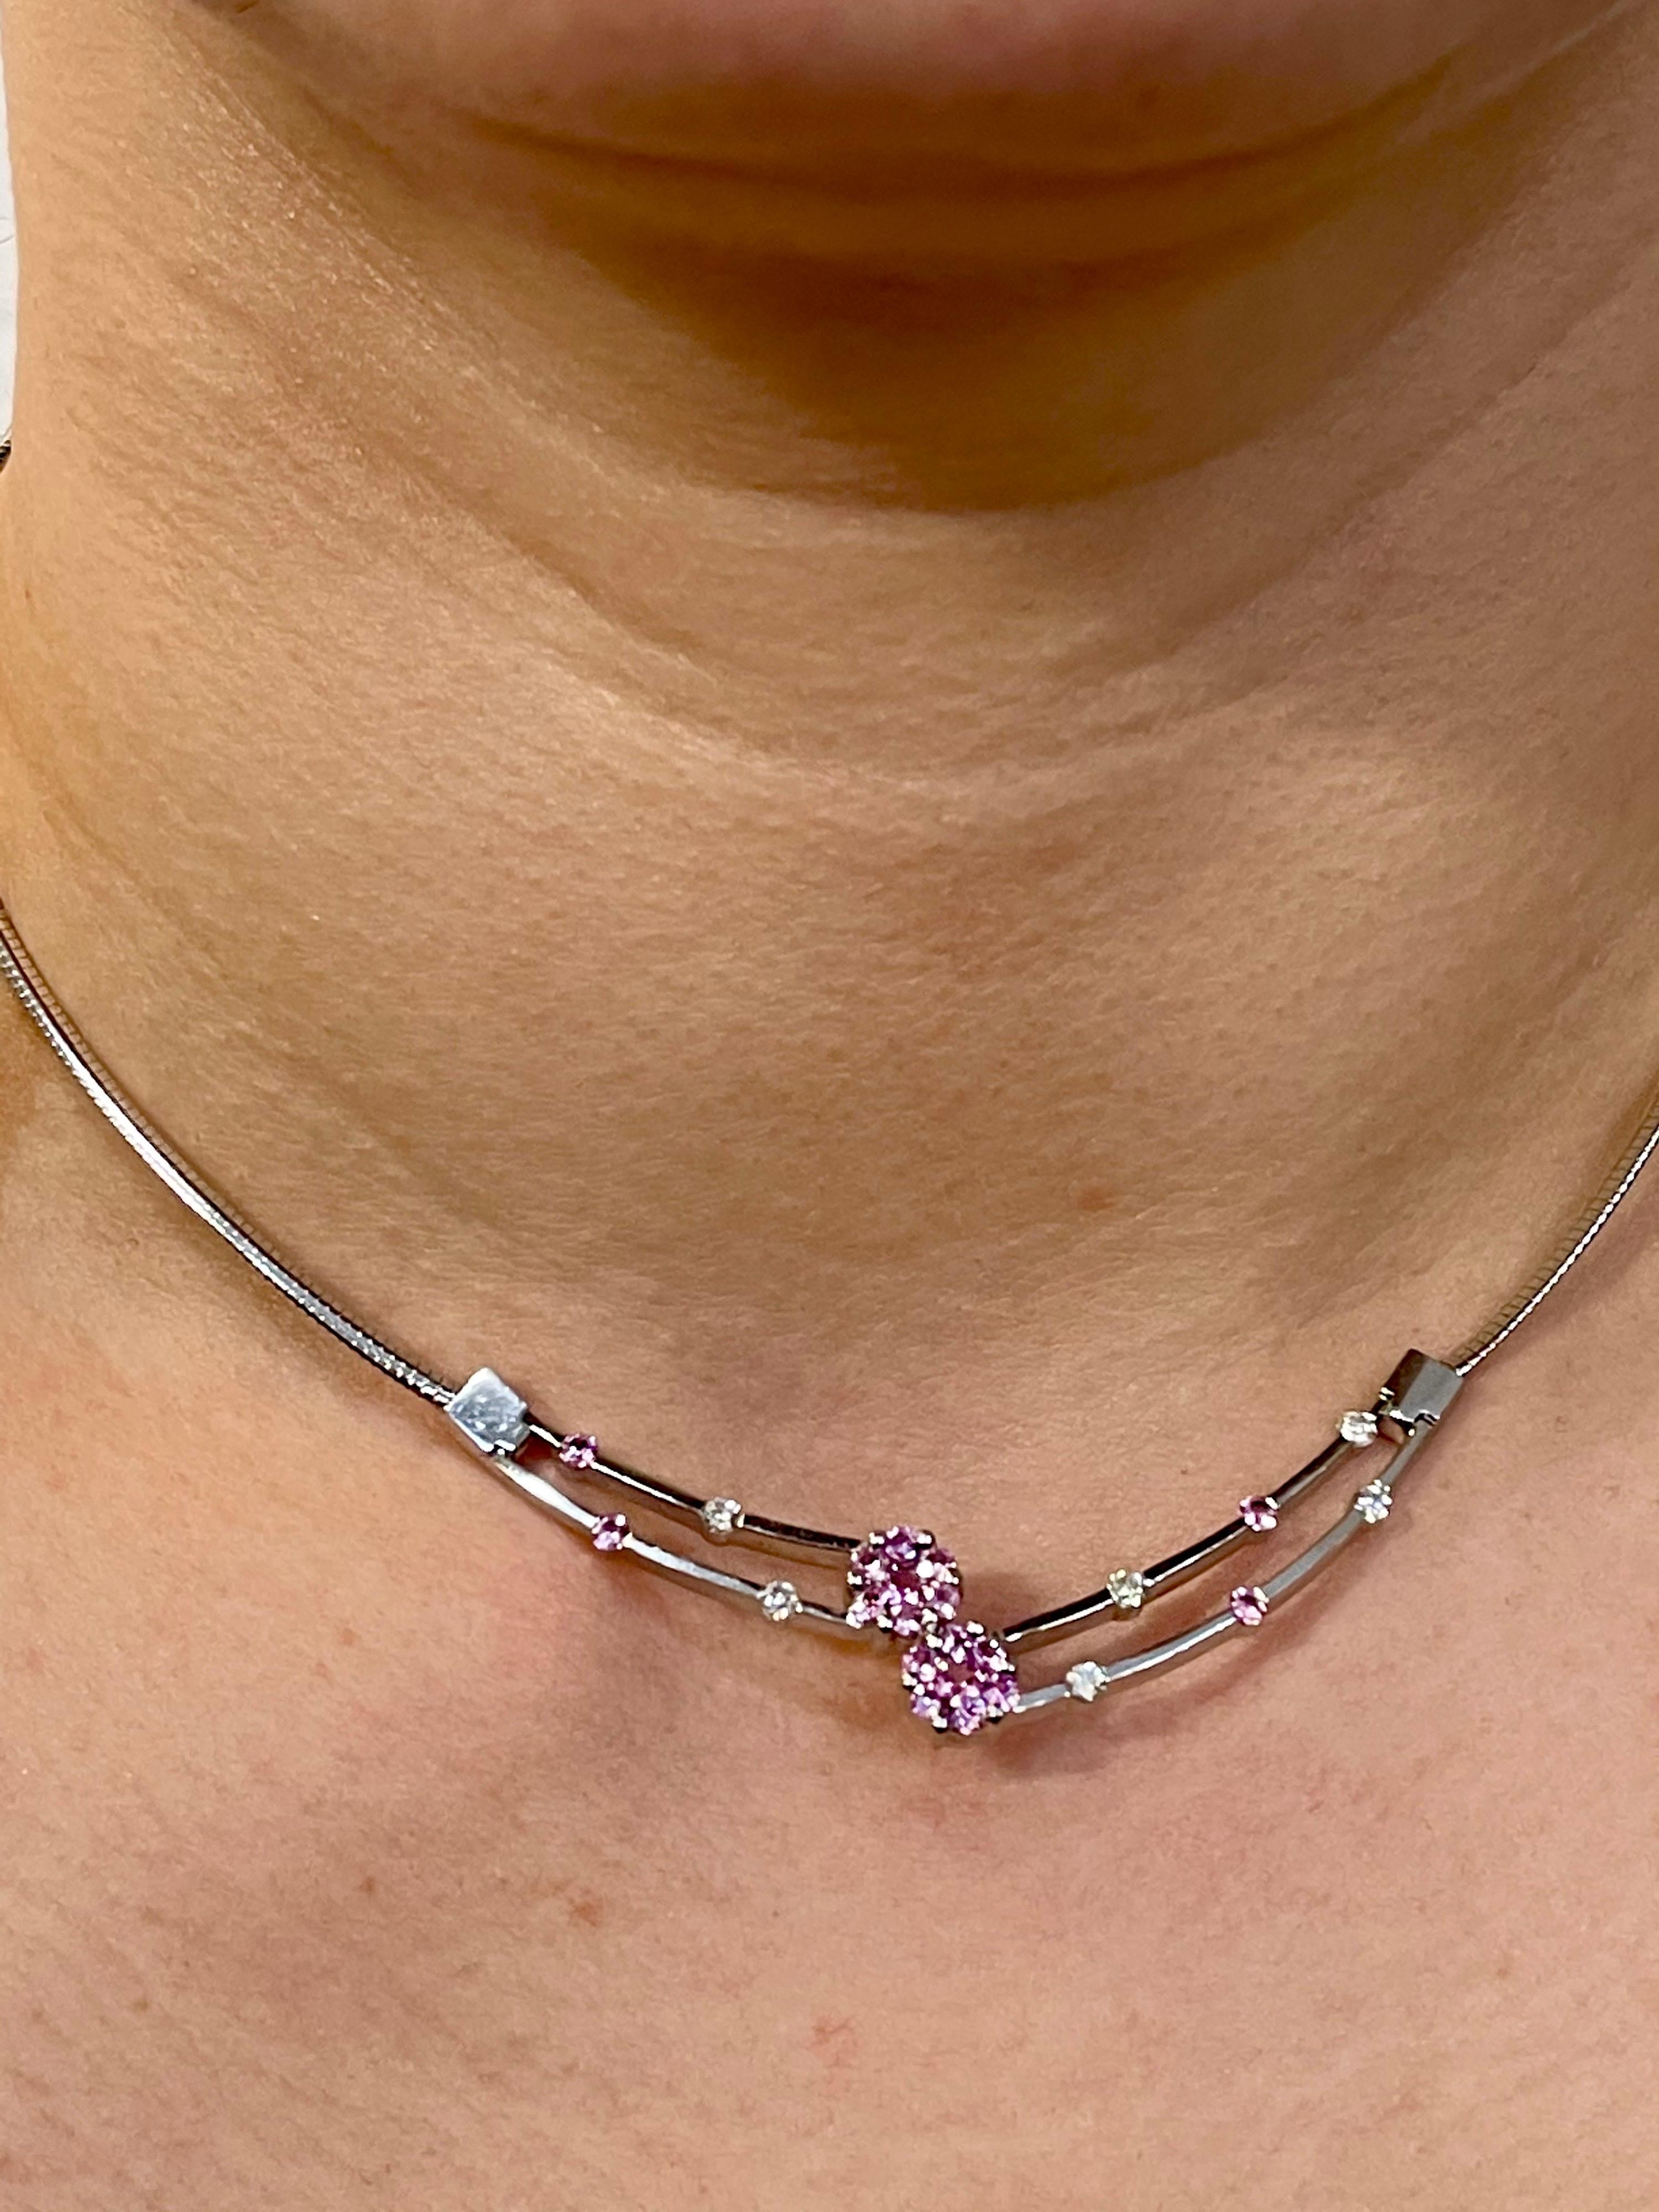 14 Karat White Gold Omega Necklace with Pink Sapphire and Diamonds, Italy For Sale 1